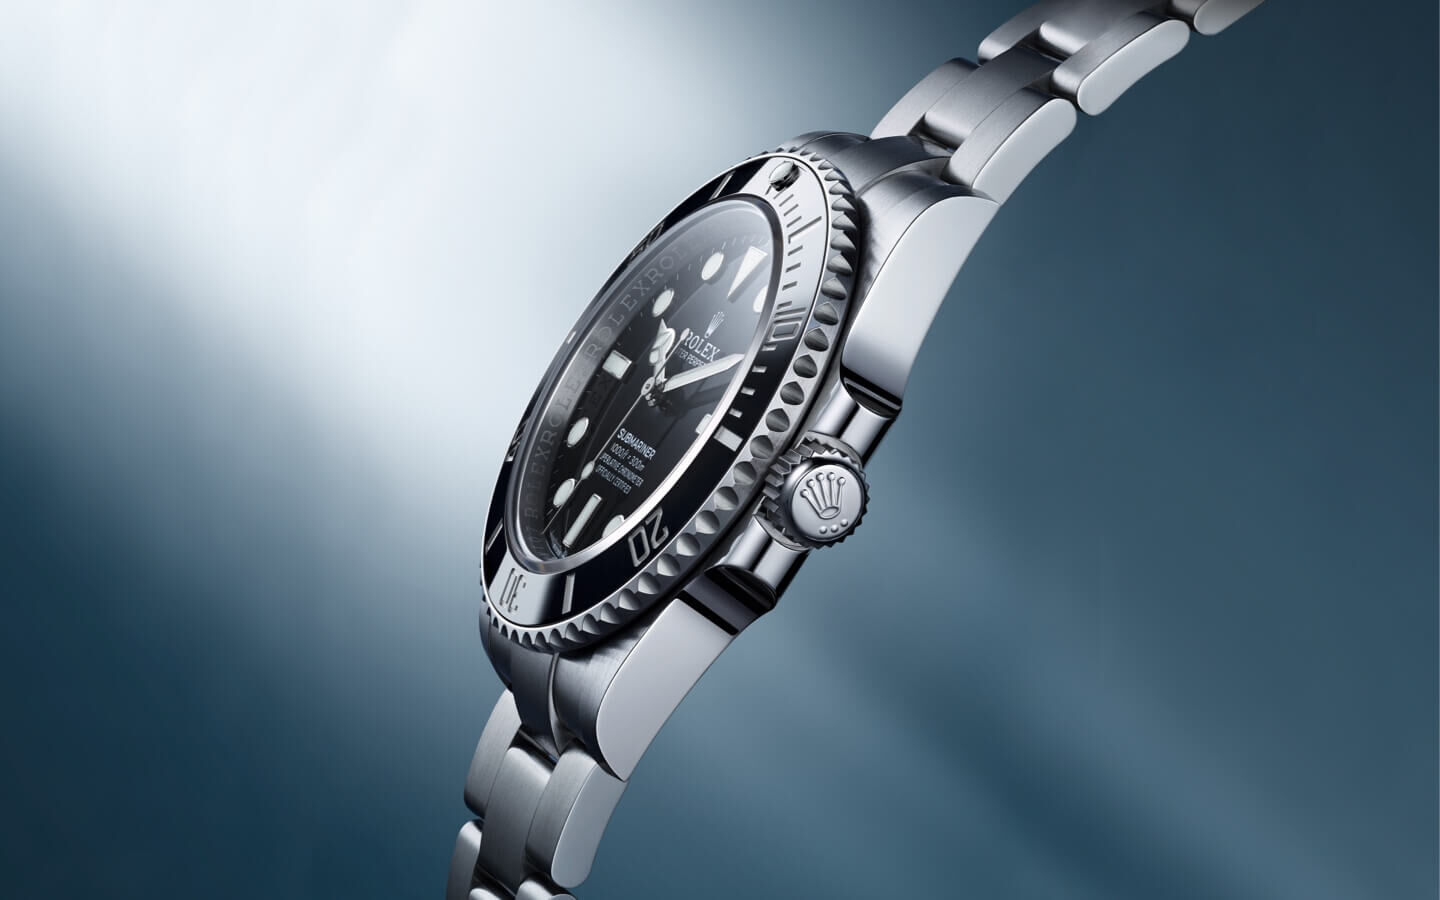 Side view of the Rolex Oyster Perpetual Submariner against a greyish blue background streaked with white light